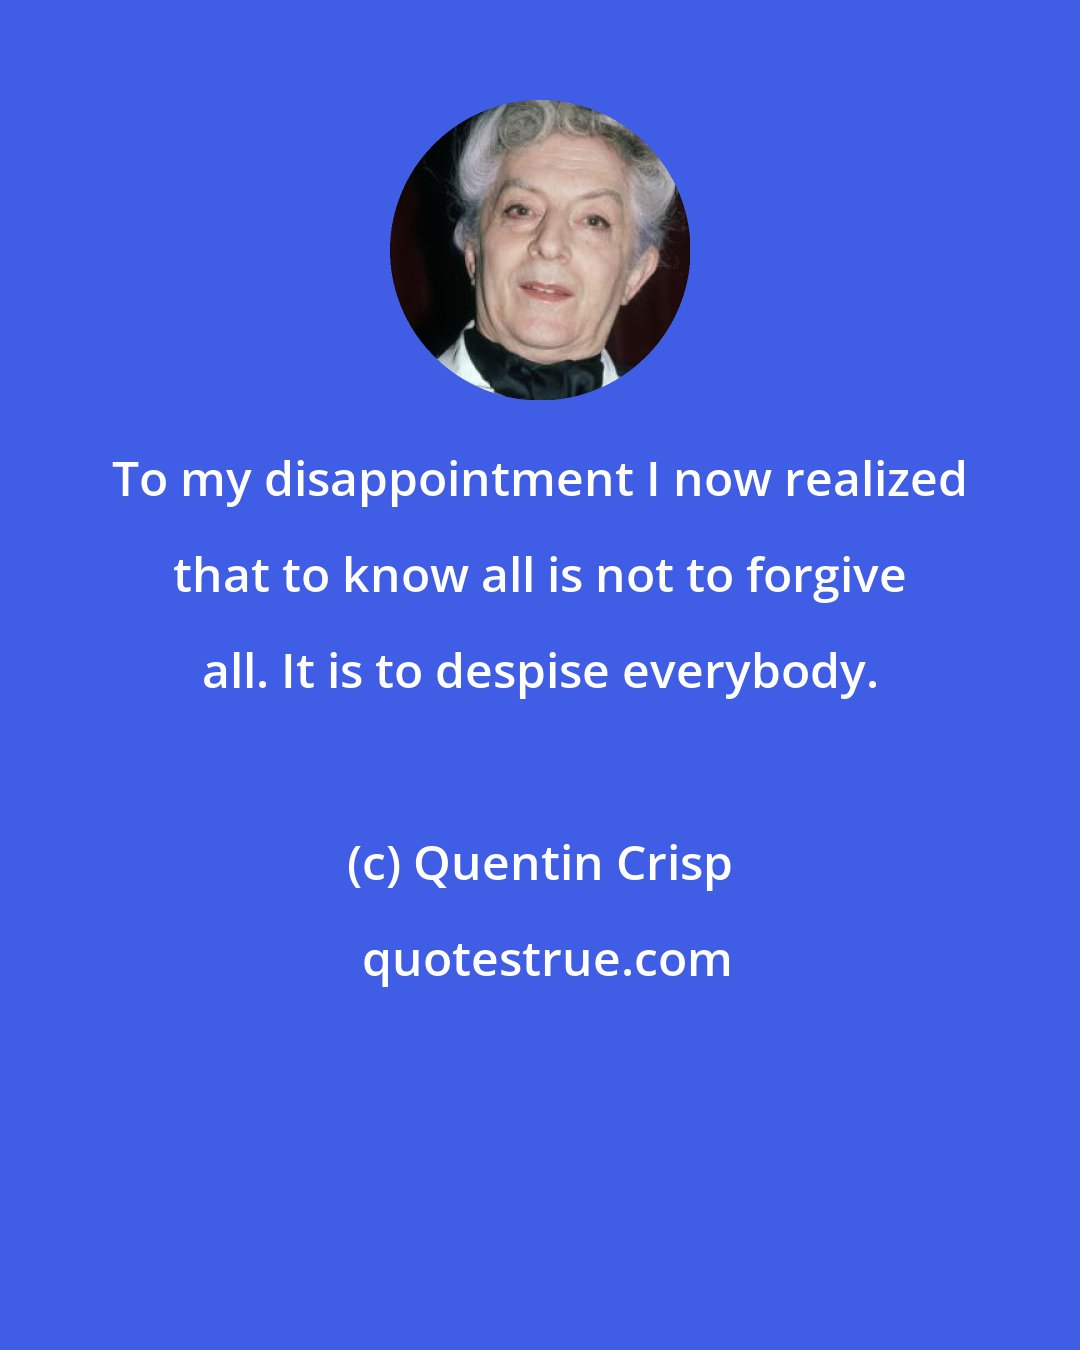 Quentin Crisp: To my disappointment I now realized that to know all is not to forgive all. It is to despise everybody.